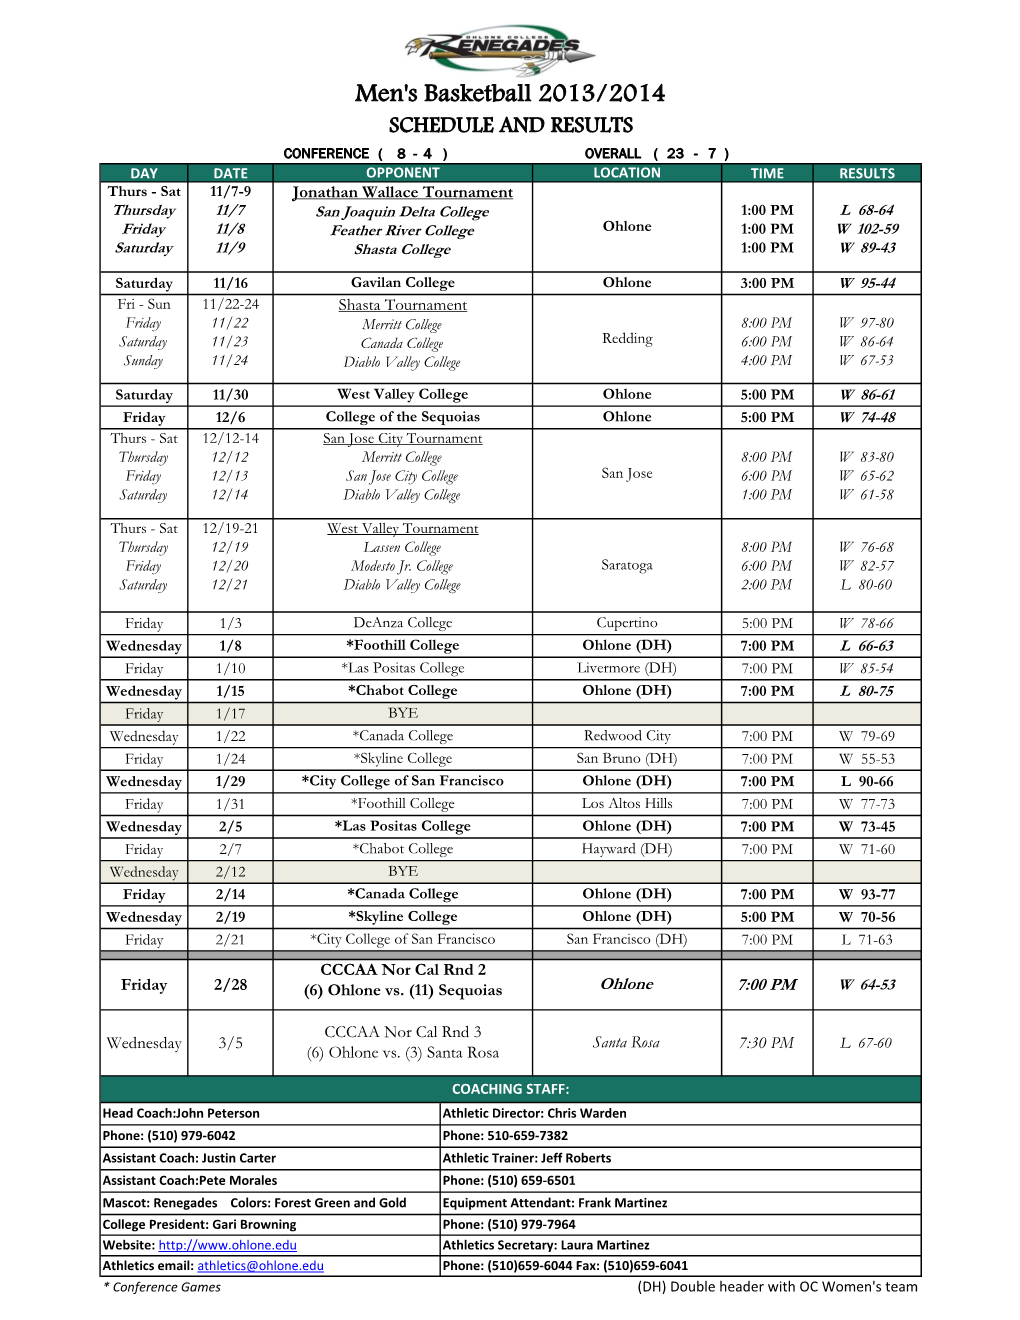 Men's Basketball 2013-2014 Schedule and Results